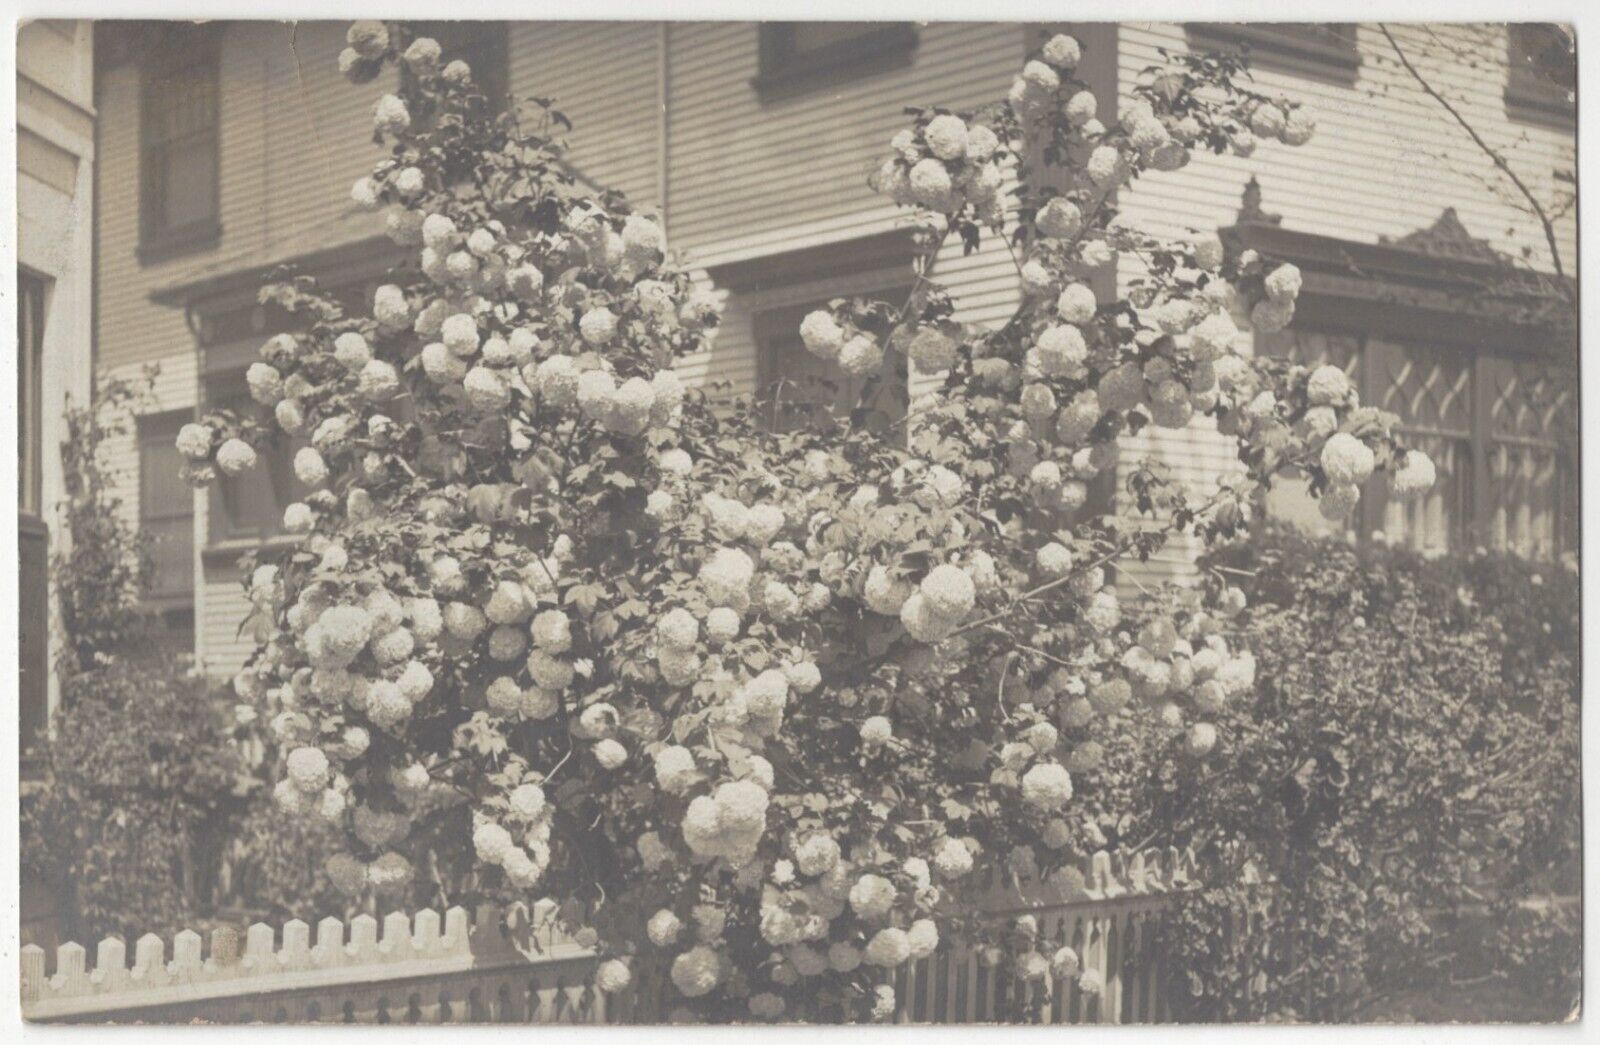 1910 Fitchburg, Oakland, California REAL PHOTO Residential Home, Huge Rose Bush